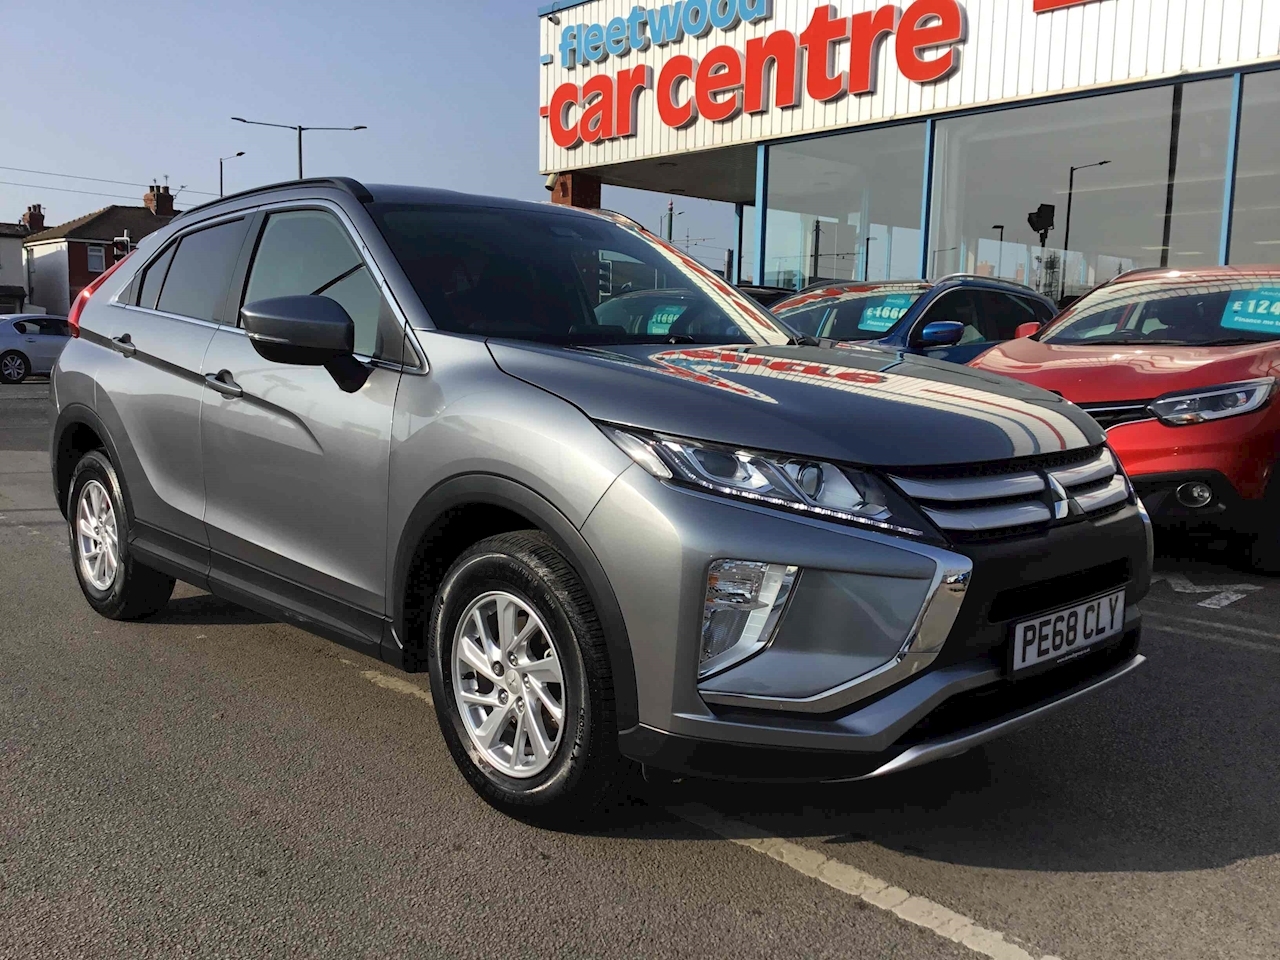 1.5T 2 SUV 5dr Petrol (s/s) (163 ps)